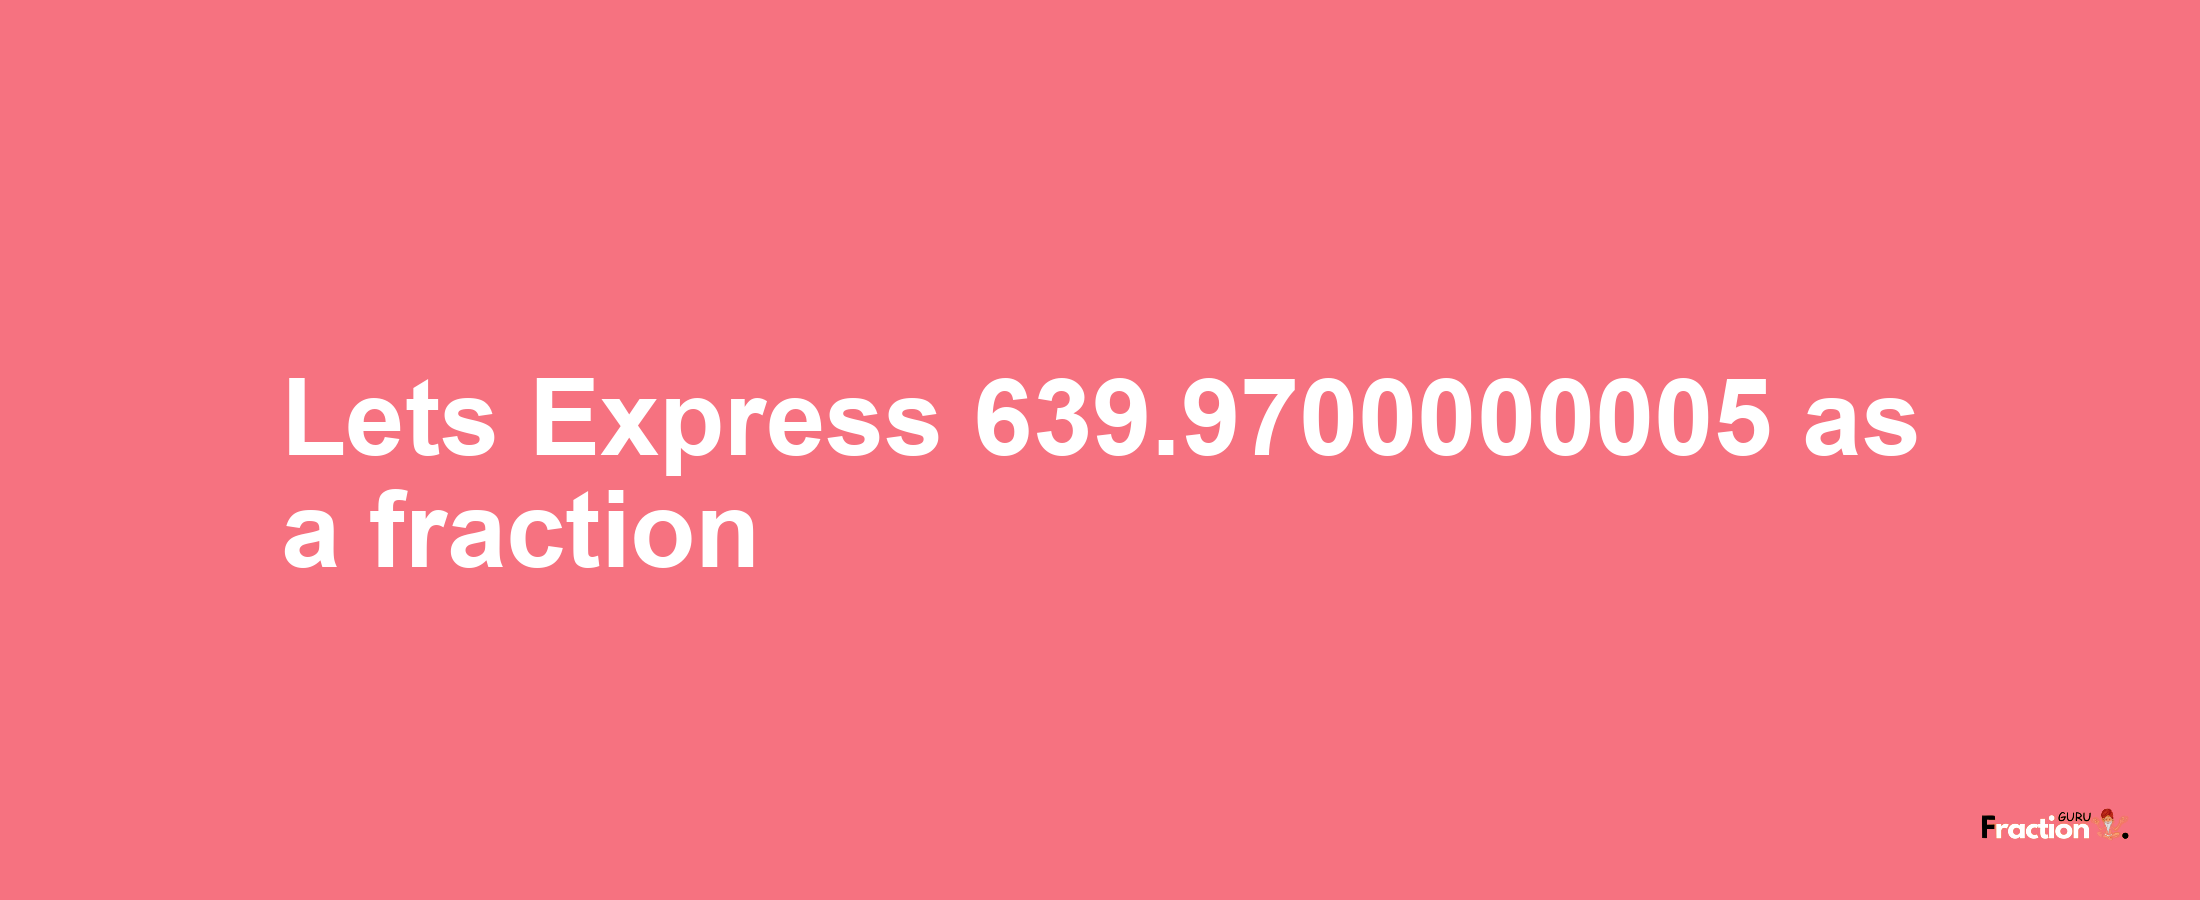 Lets Express 639.9700000005 as afraction